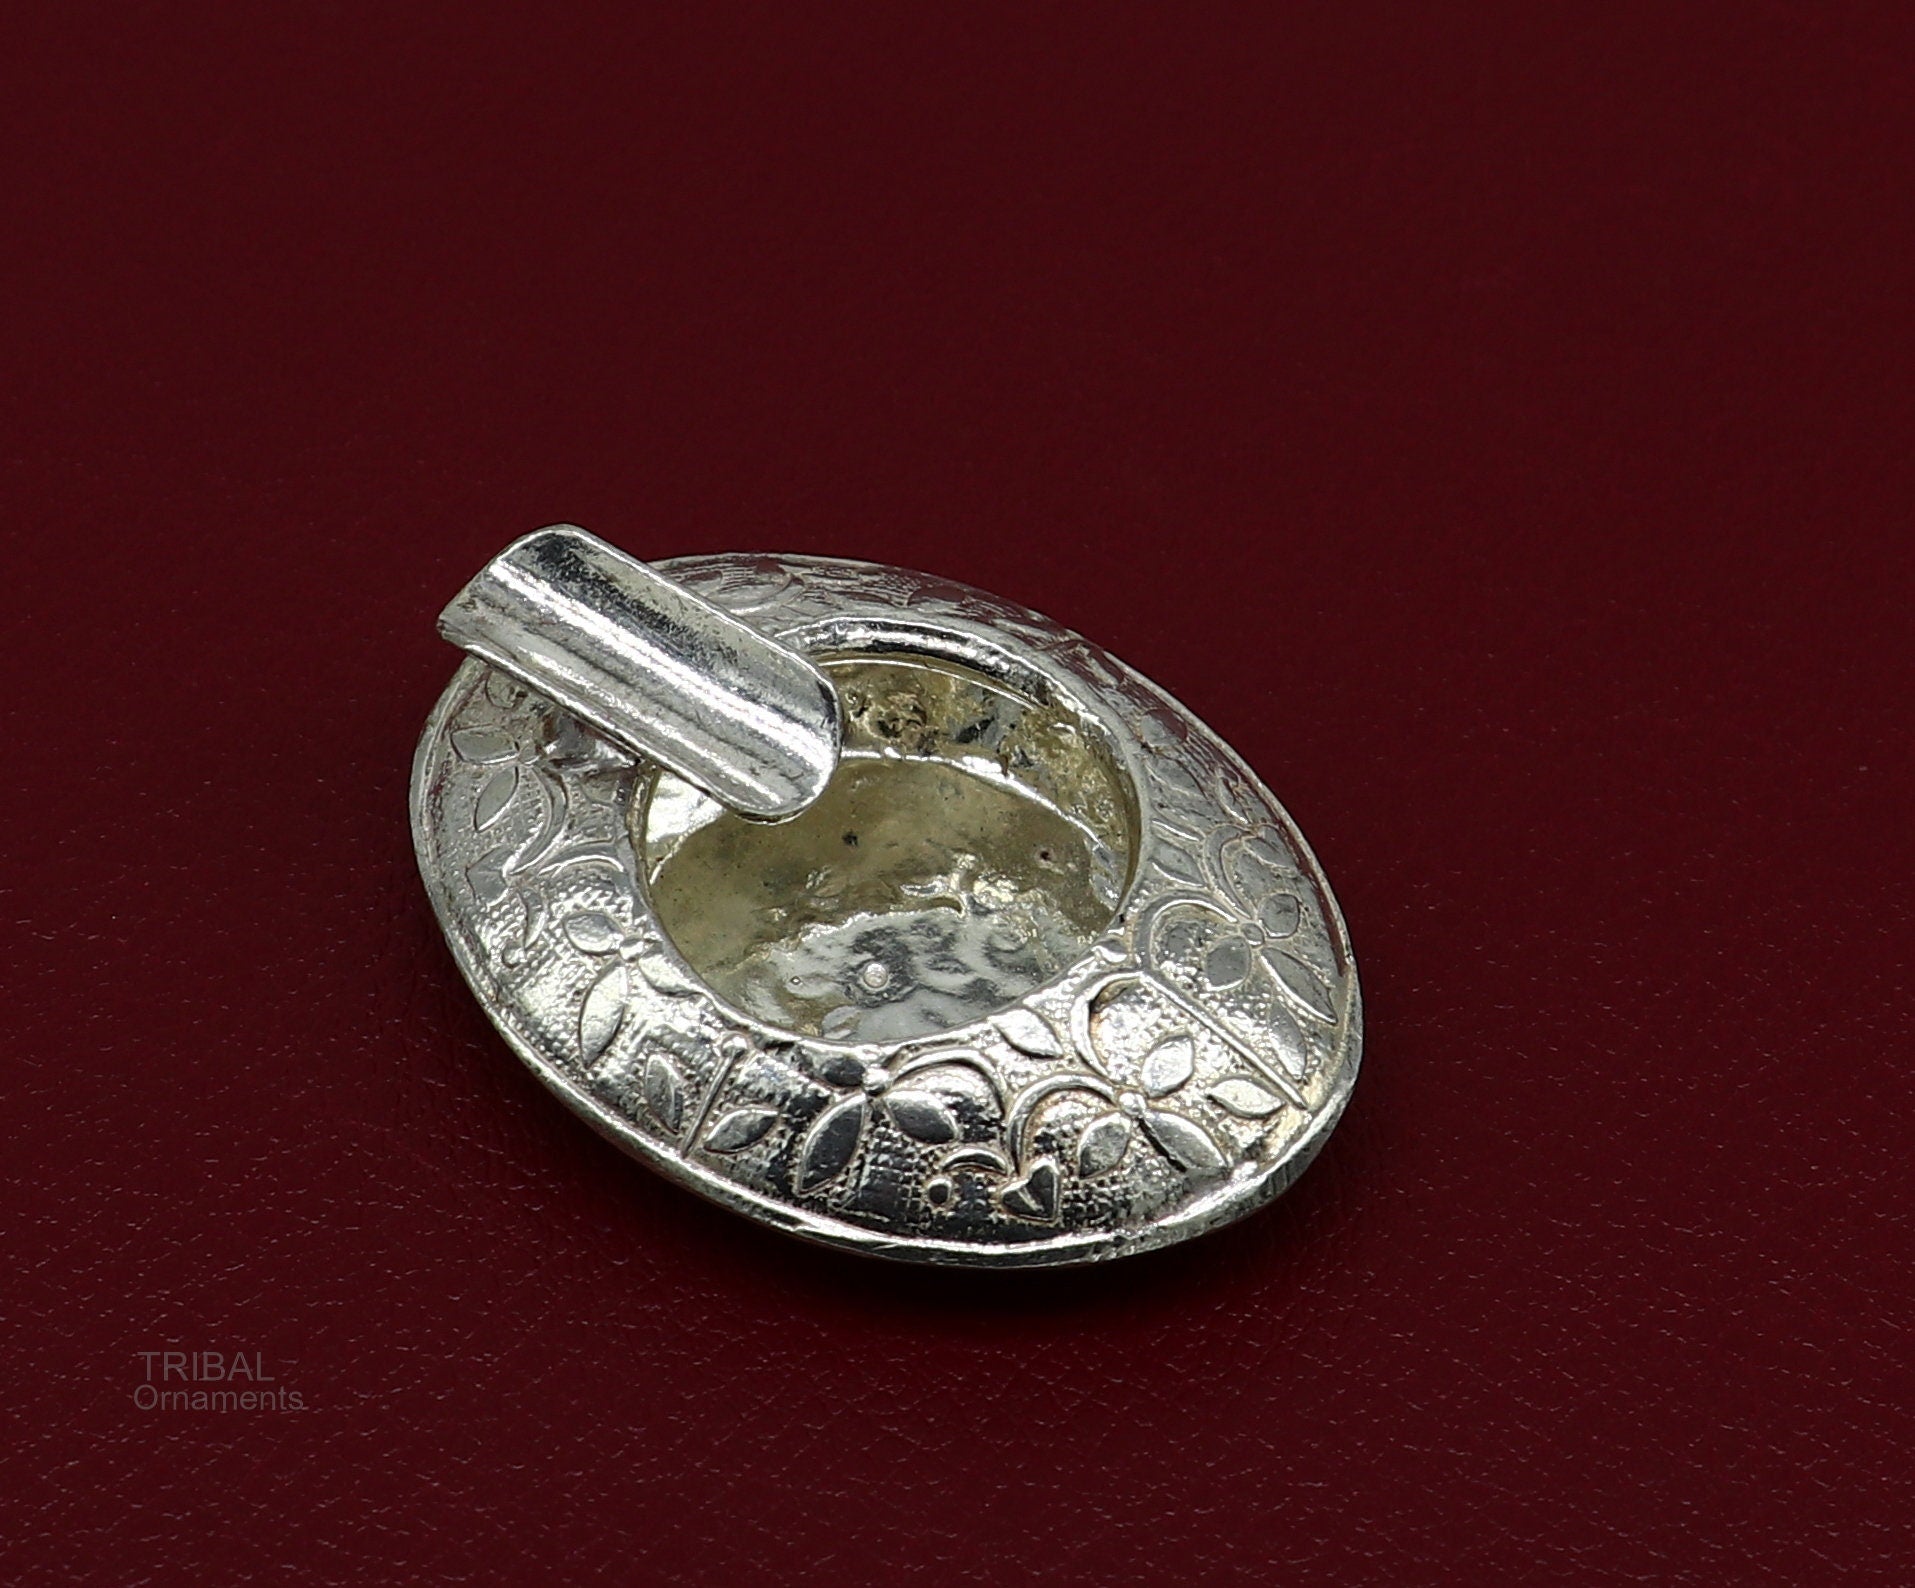 Vintage unique style design 925 sterling silver handmade flower art small ashtray for cigarette royal unique luxury gift stb328 - TRIBAL ORNAMENTS